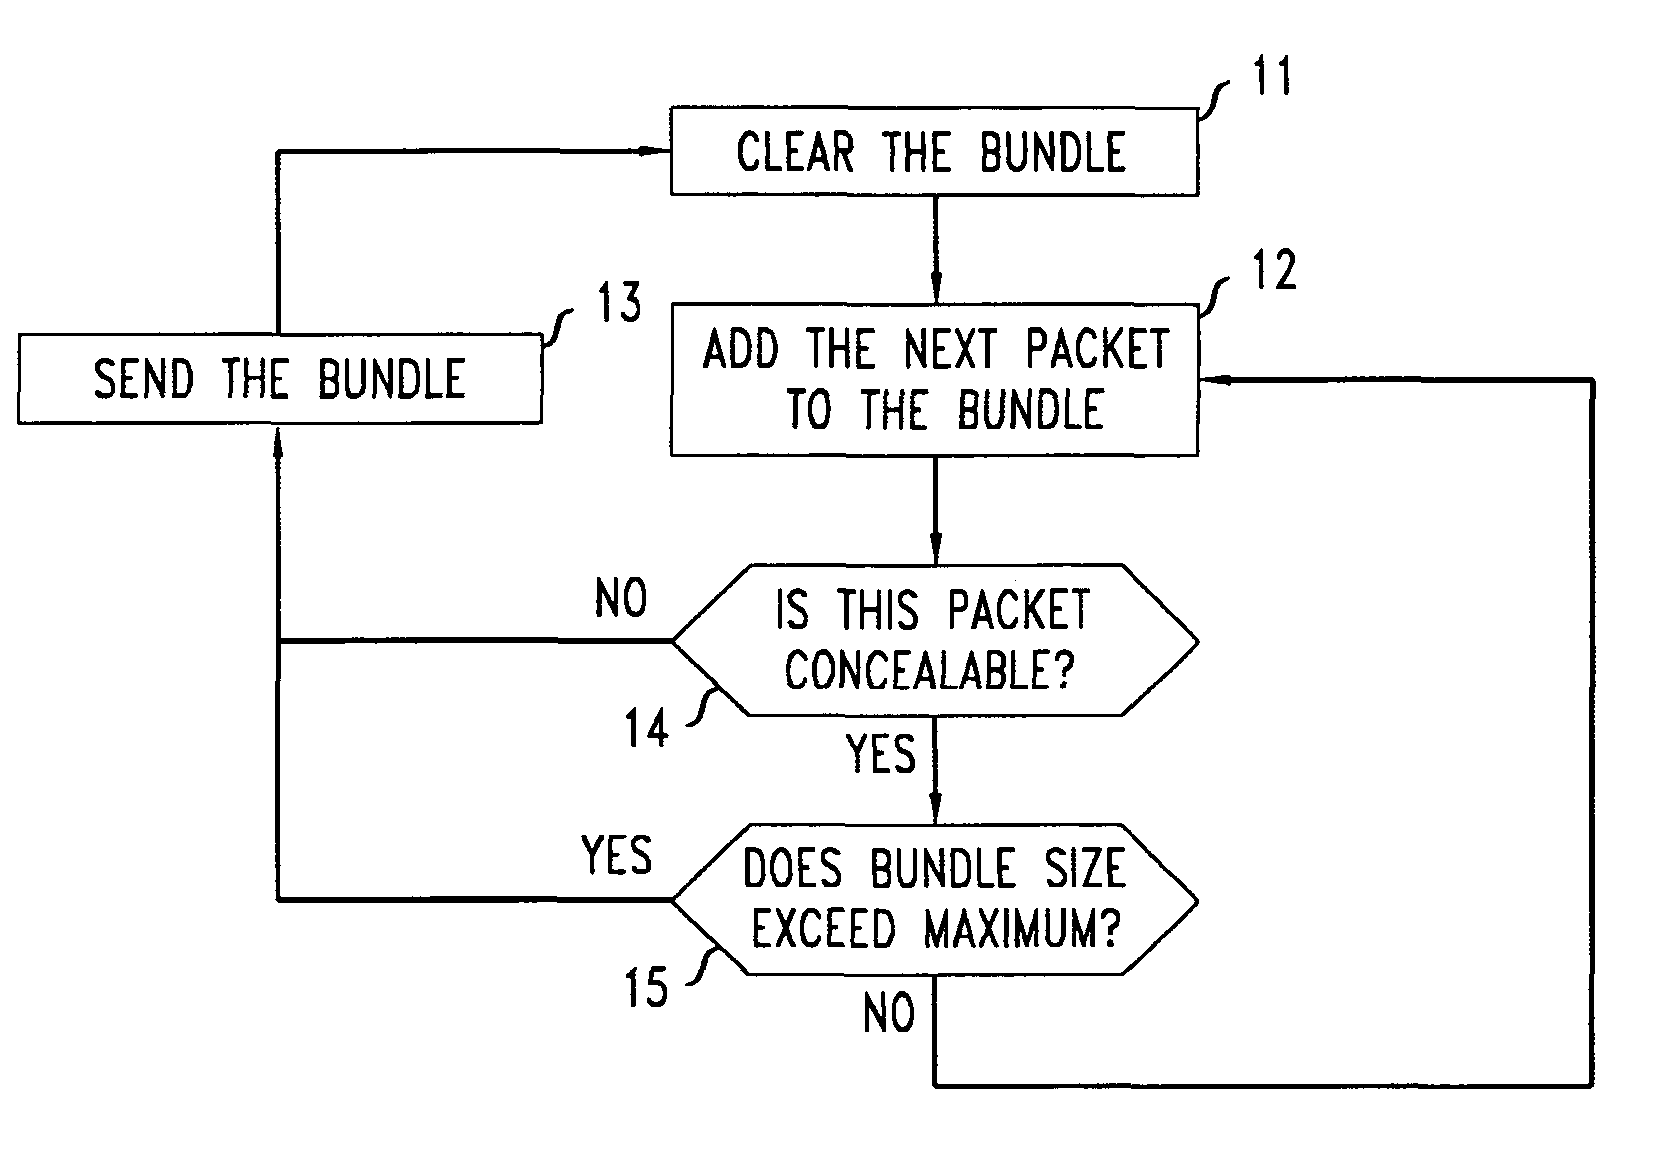 Method and apparatus for performing active packet bundling in a voice over IP communications system based on voice concealability